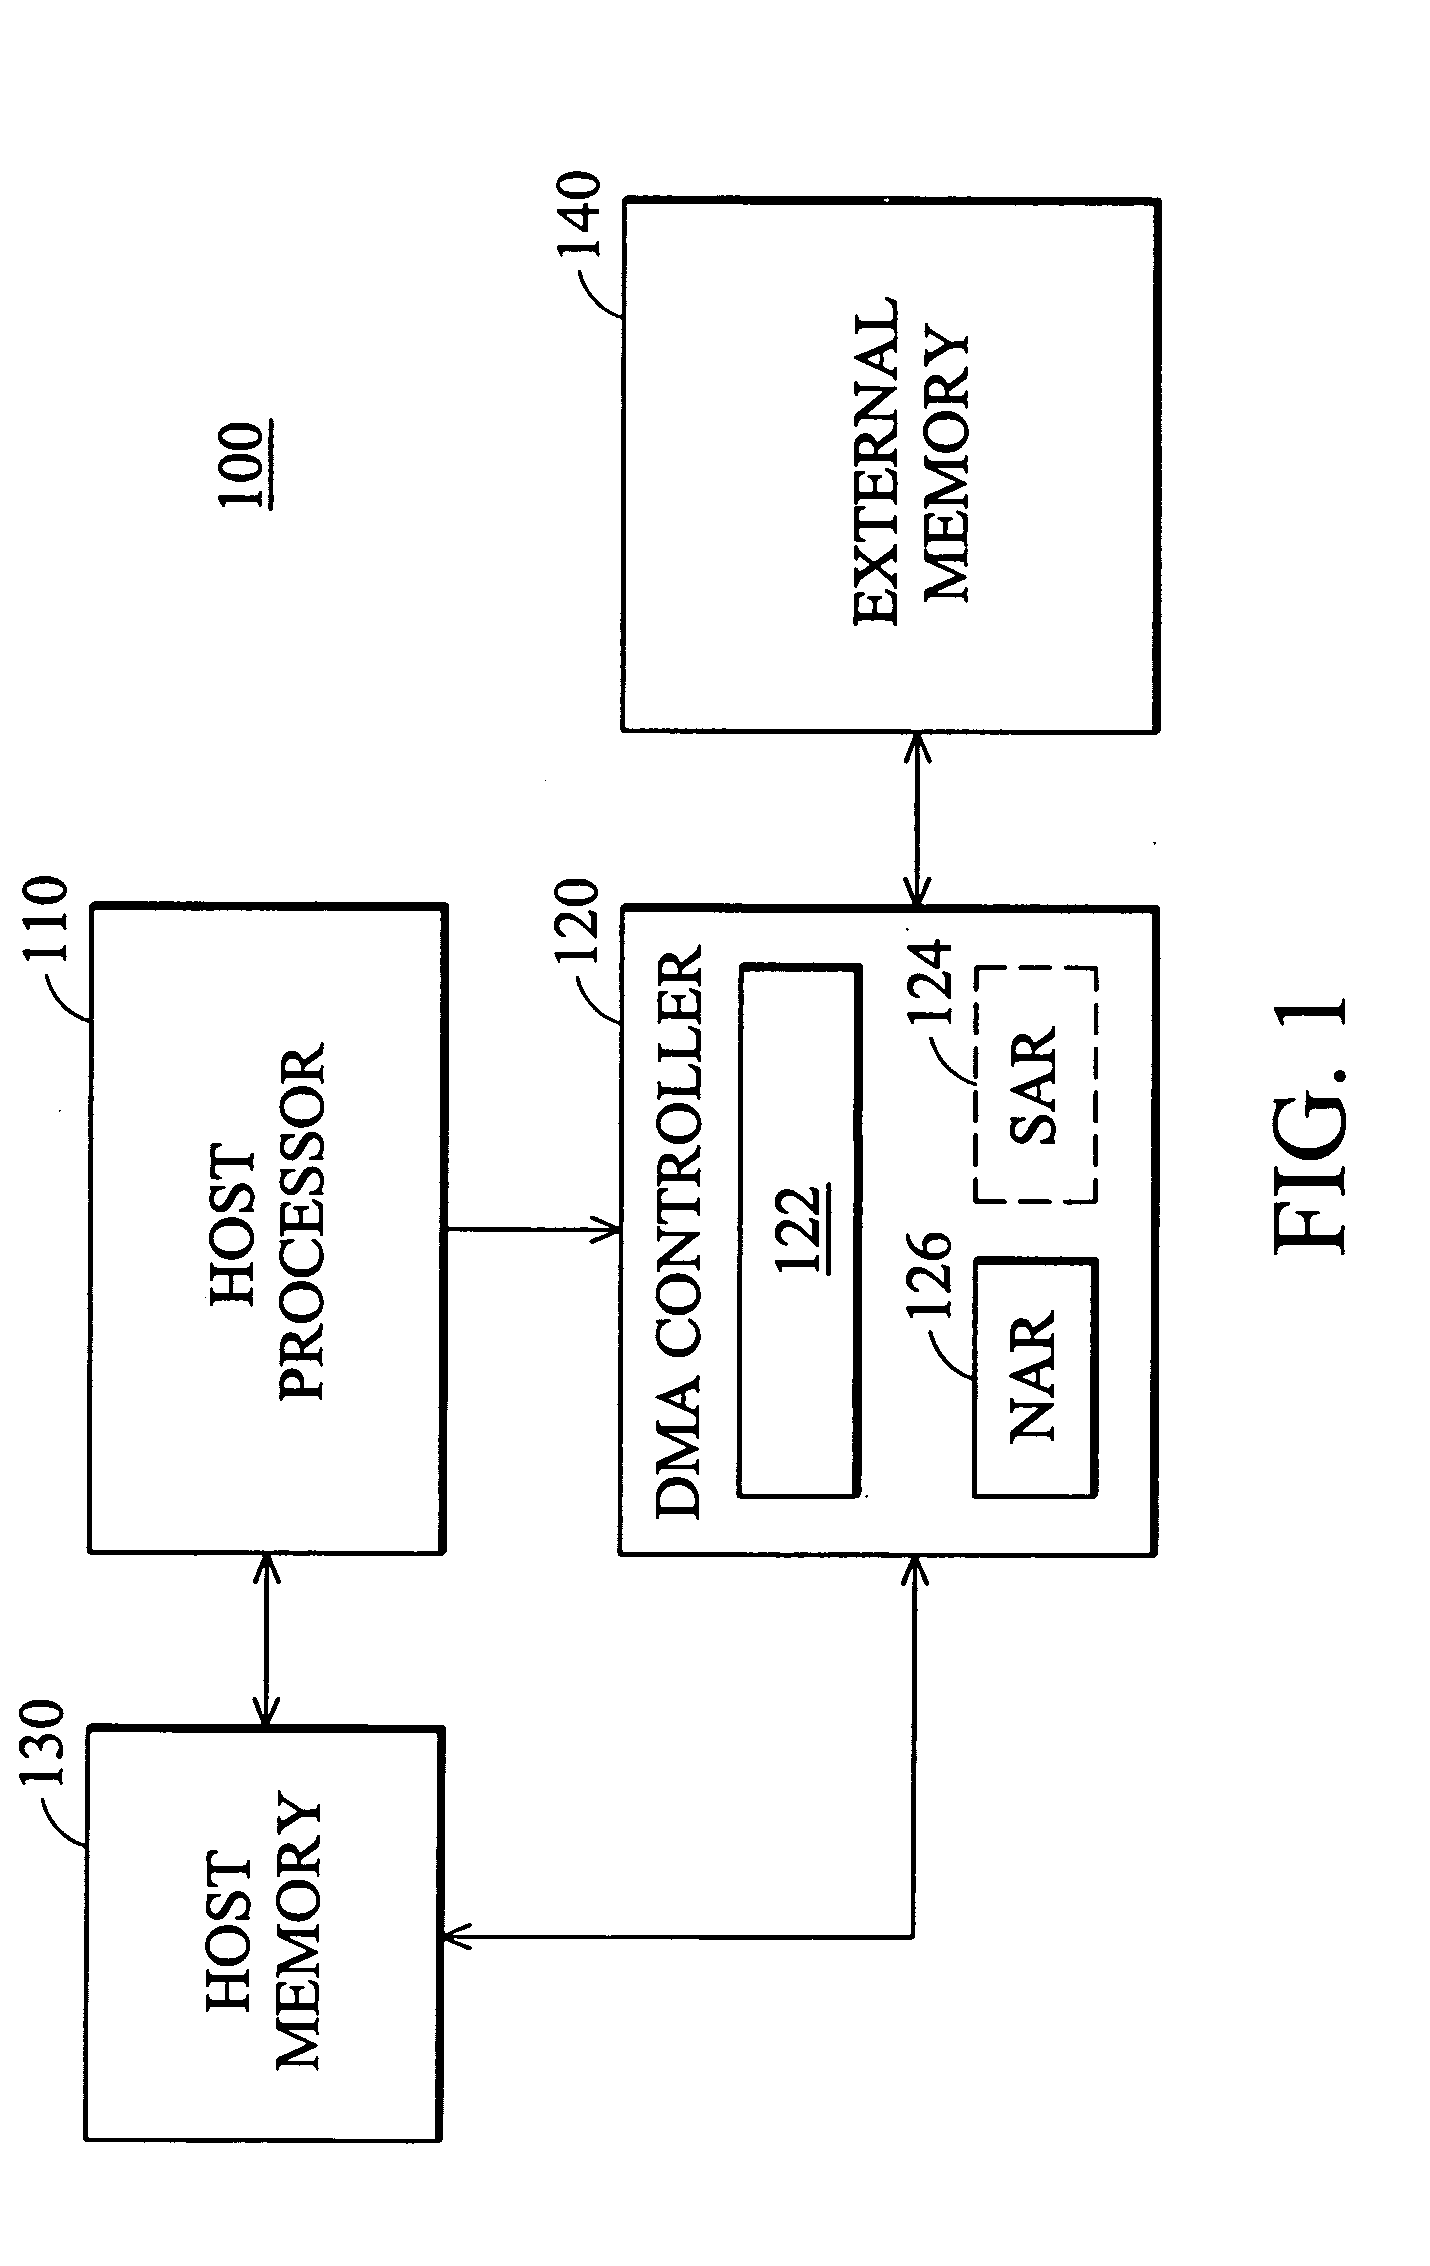 Method for performing DMA transfers with dynamic descriptor structure